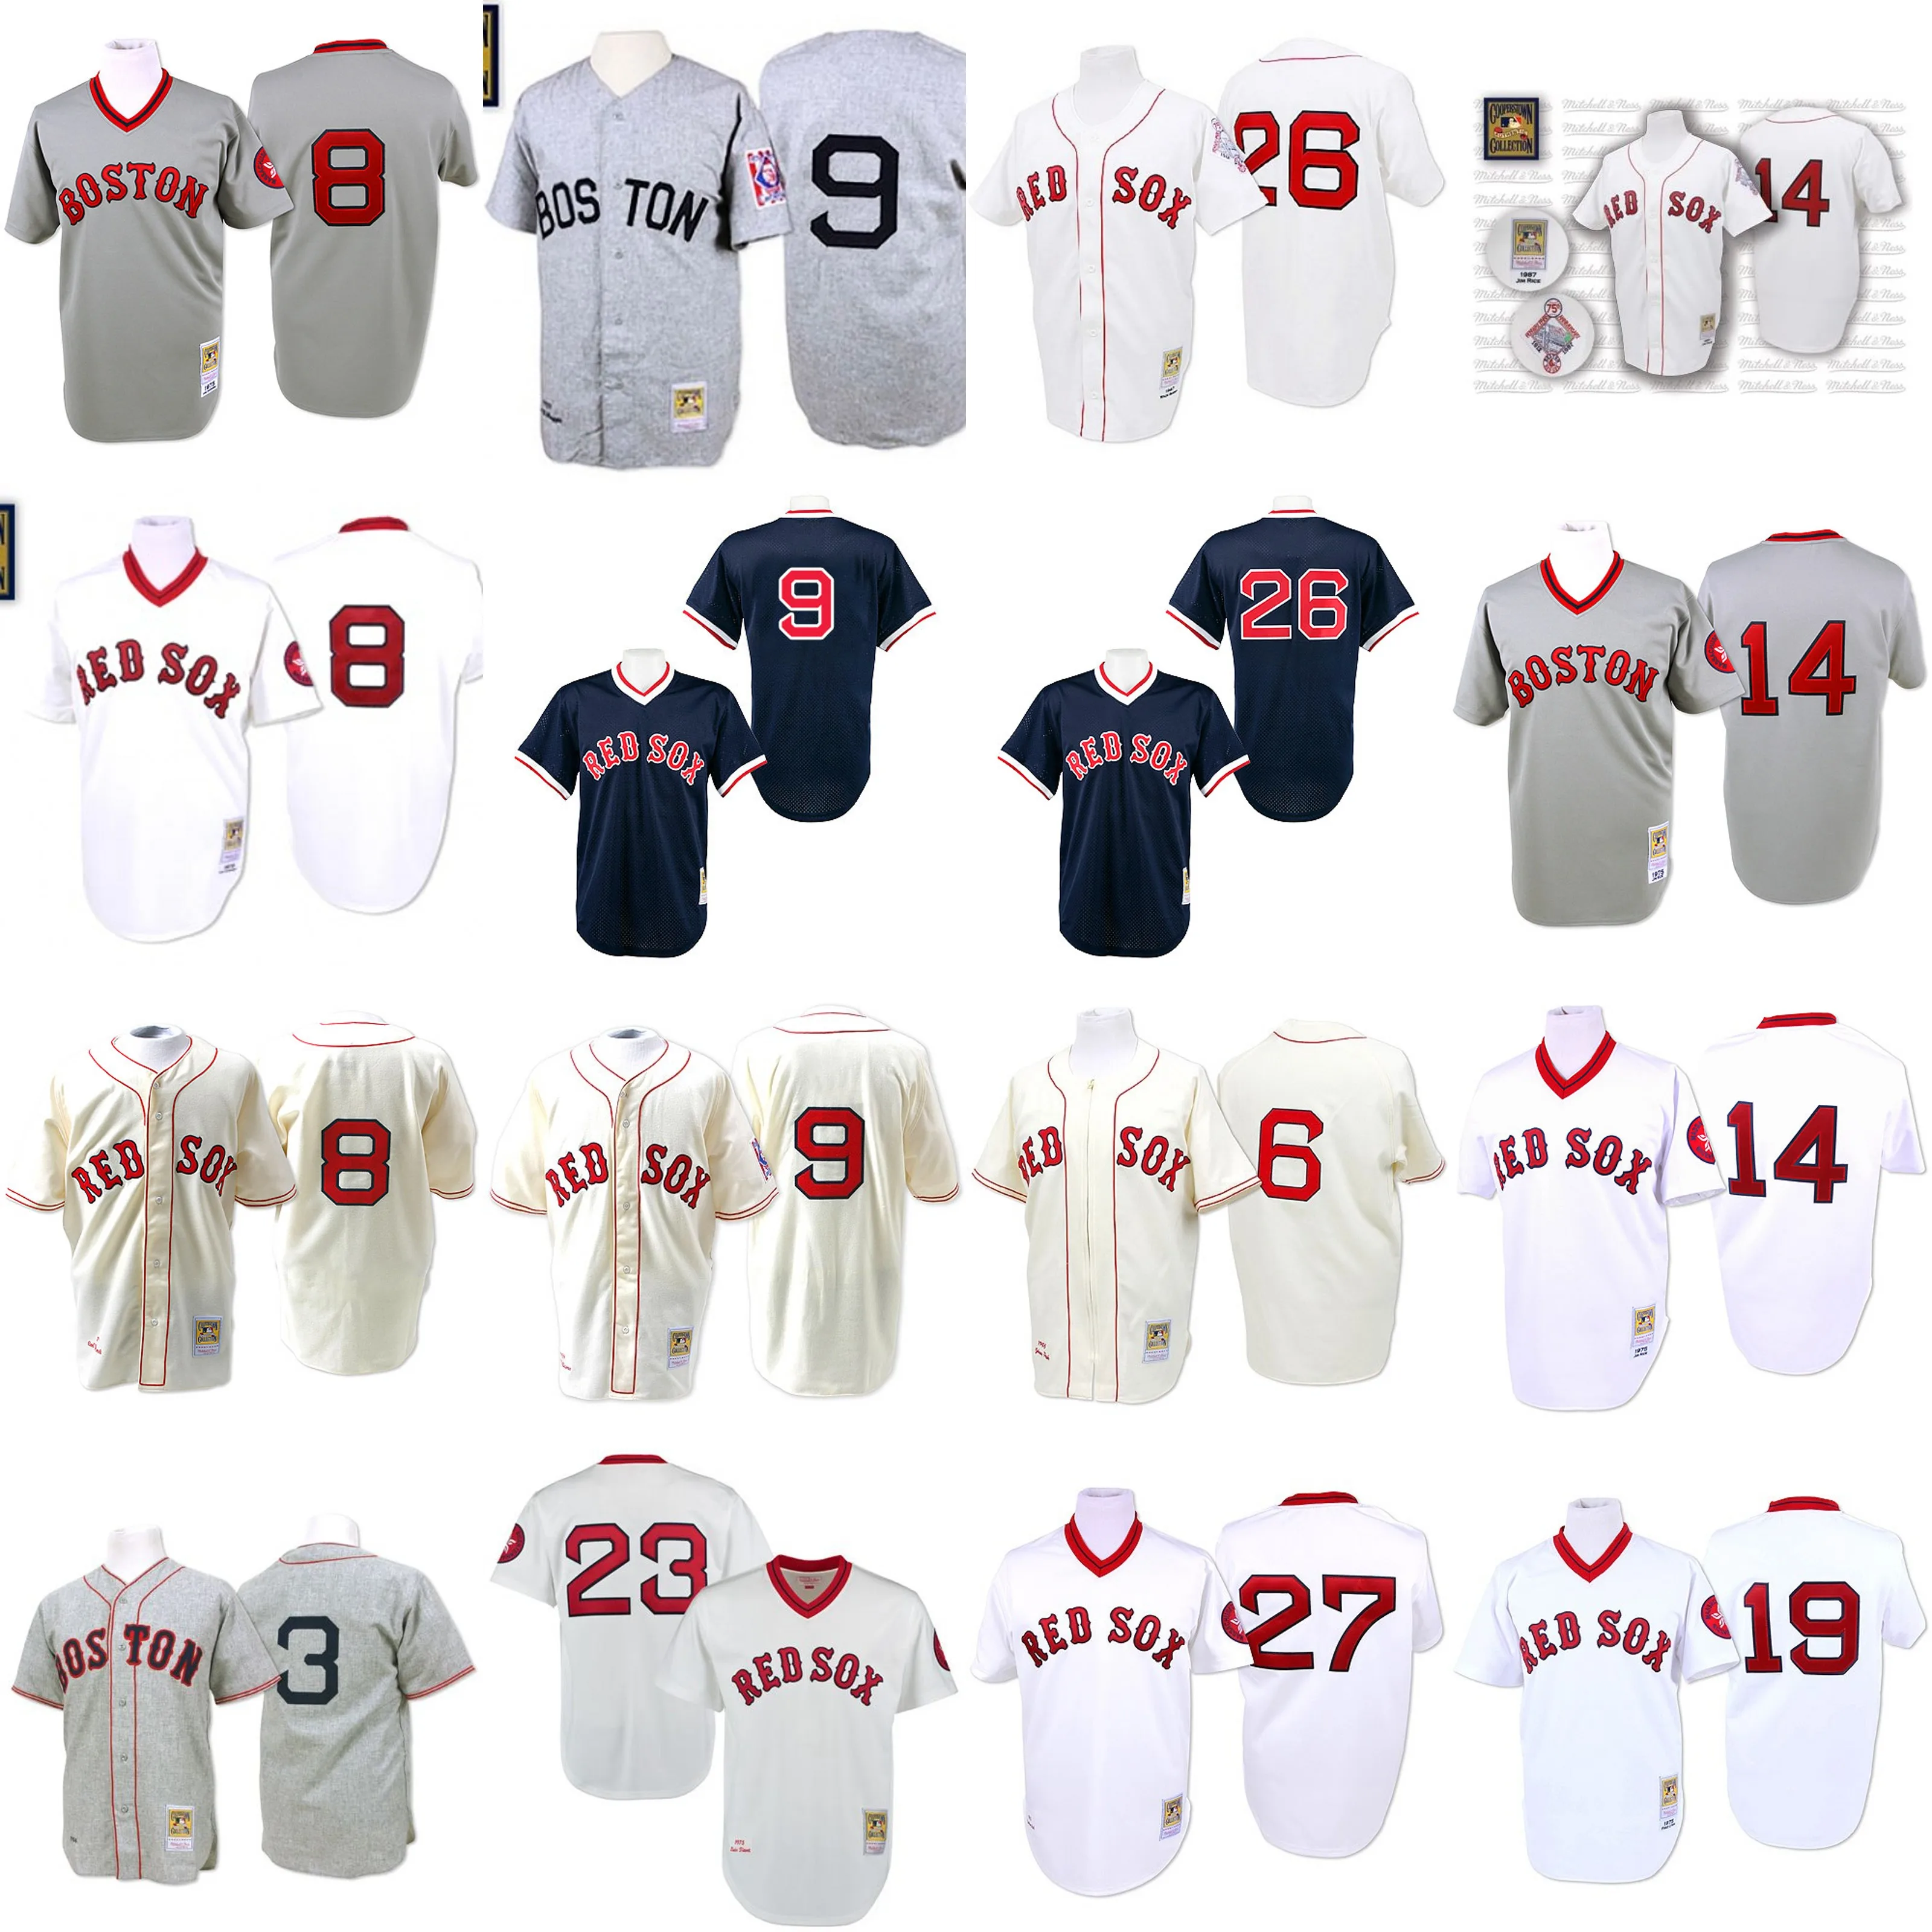 Wholesale Boston Men's 1939 Red Sox 9 Ted Williams 3 Jimmie Foxx 8